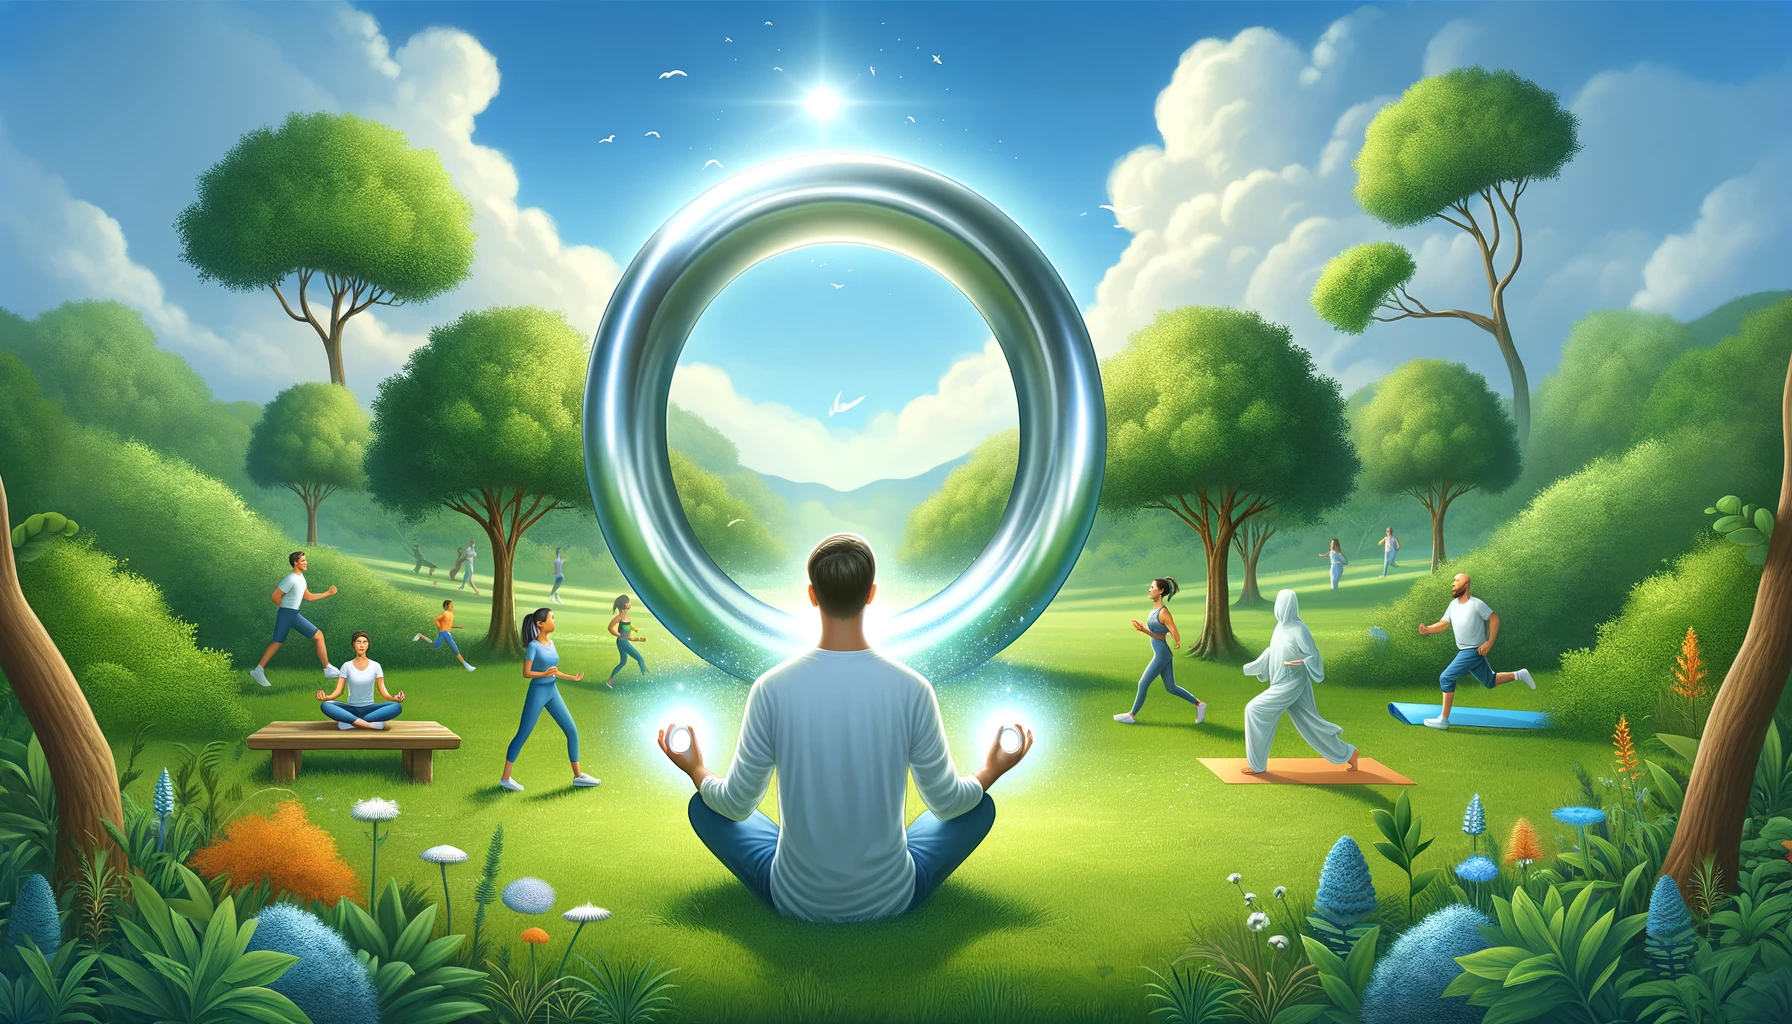 the health benefits of using a cock ring. In the center, a person is sitting cross-legged in a peaceful, lush green park.